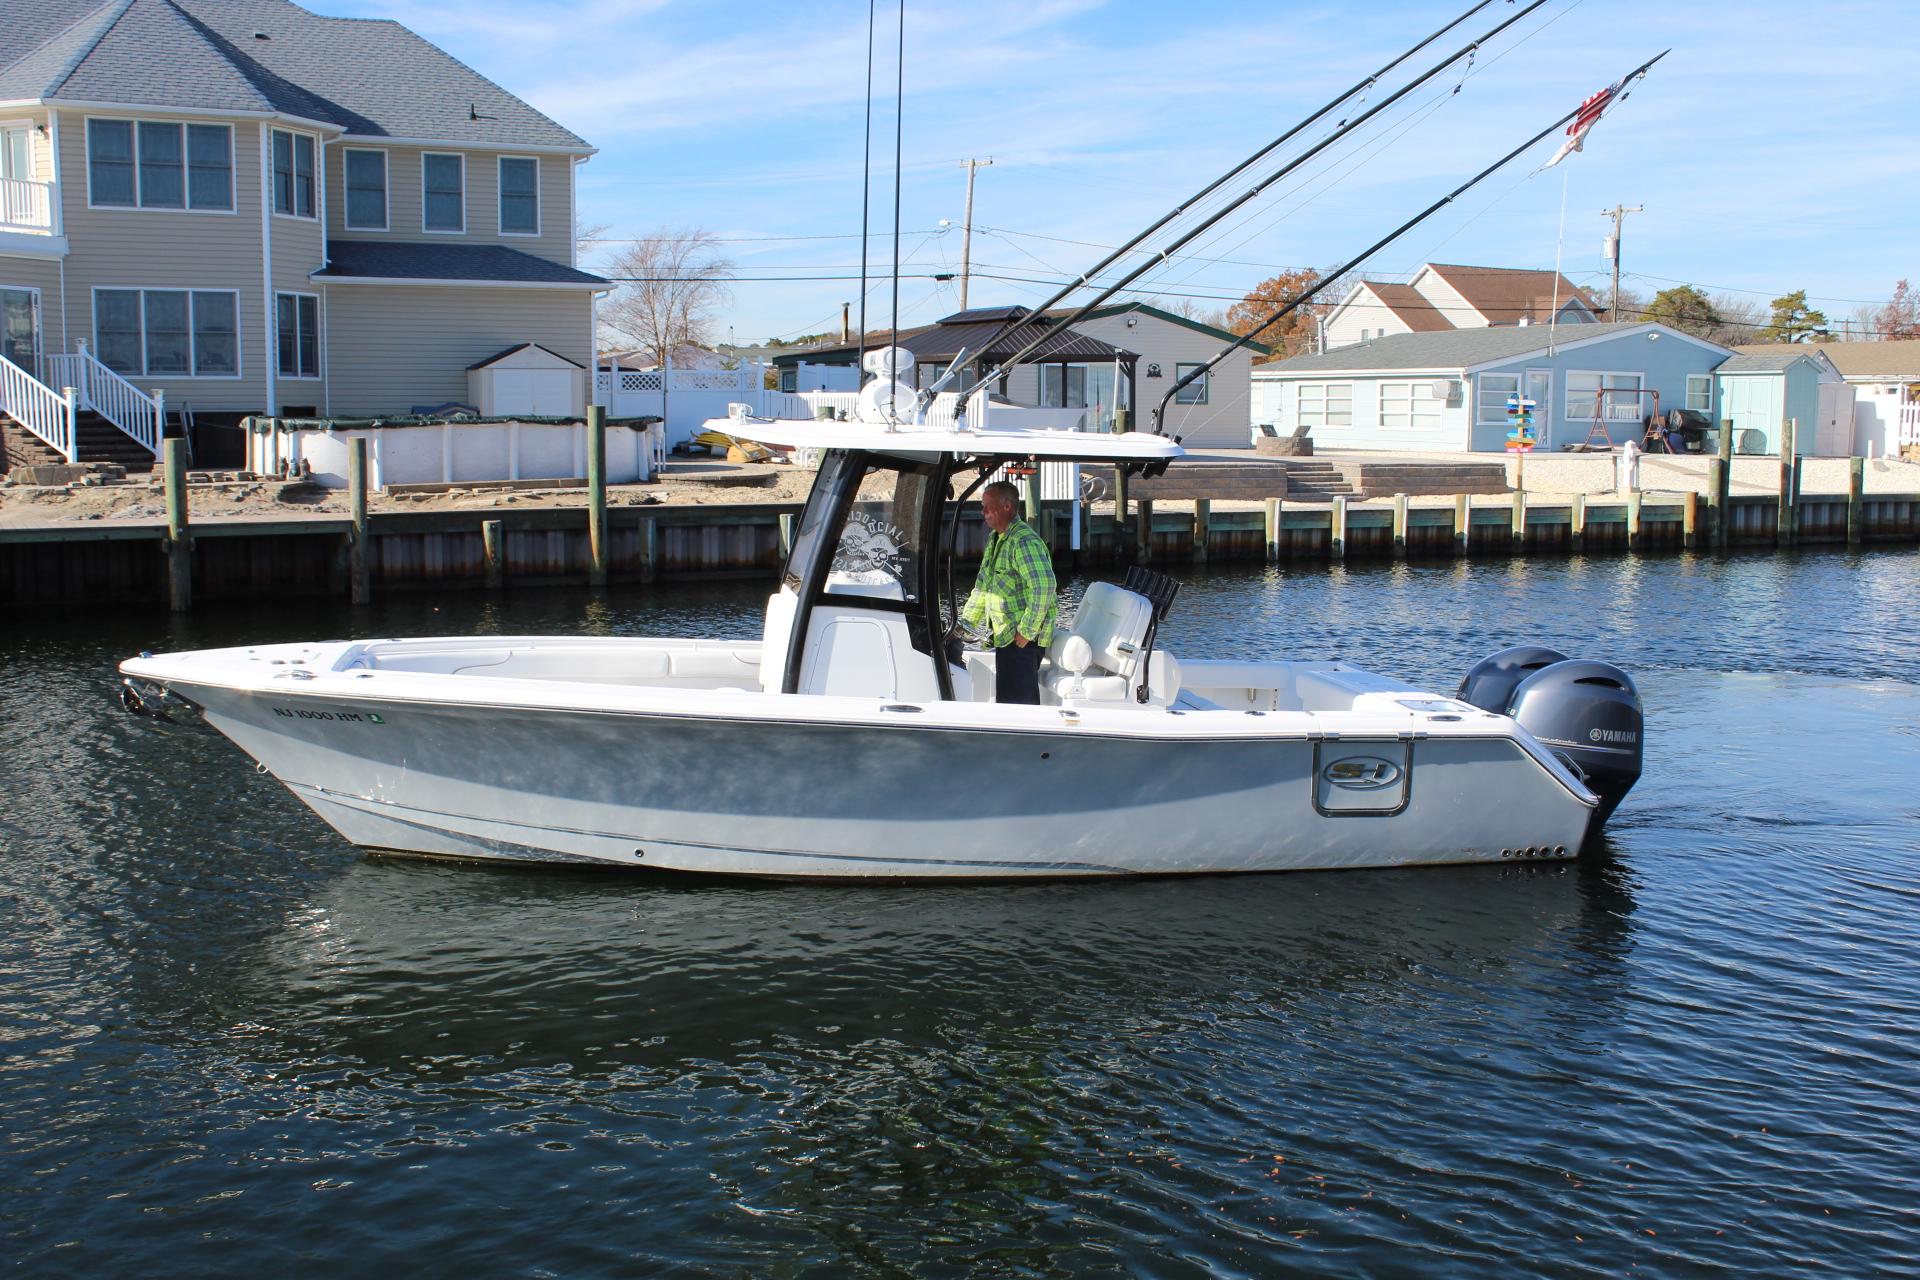 2018 Sea Hunt Gamefish 27 Forked River, New Jersey - Oyster Cove Boatworks